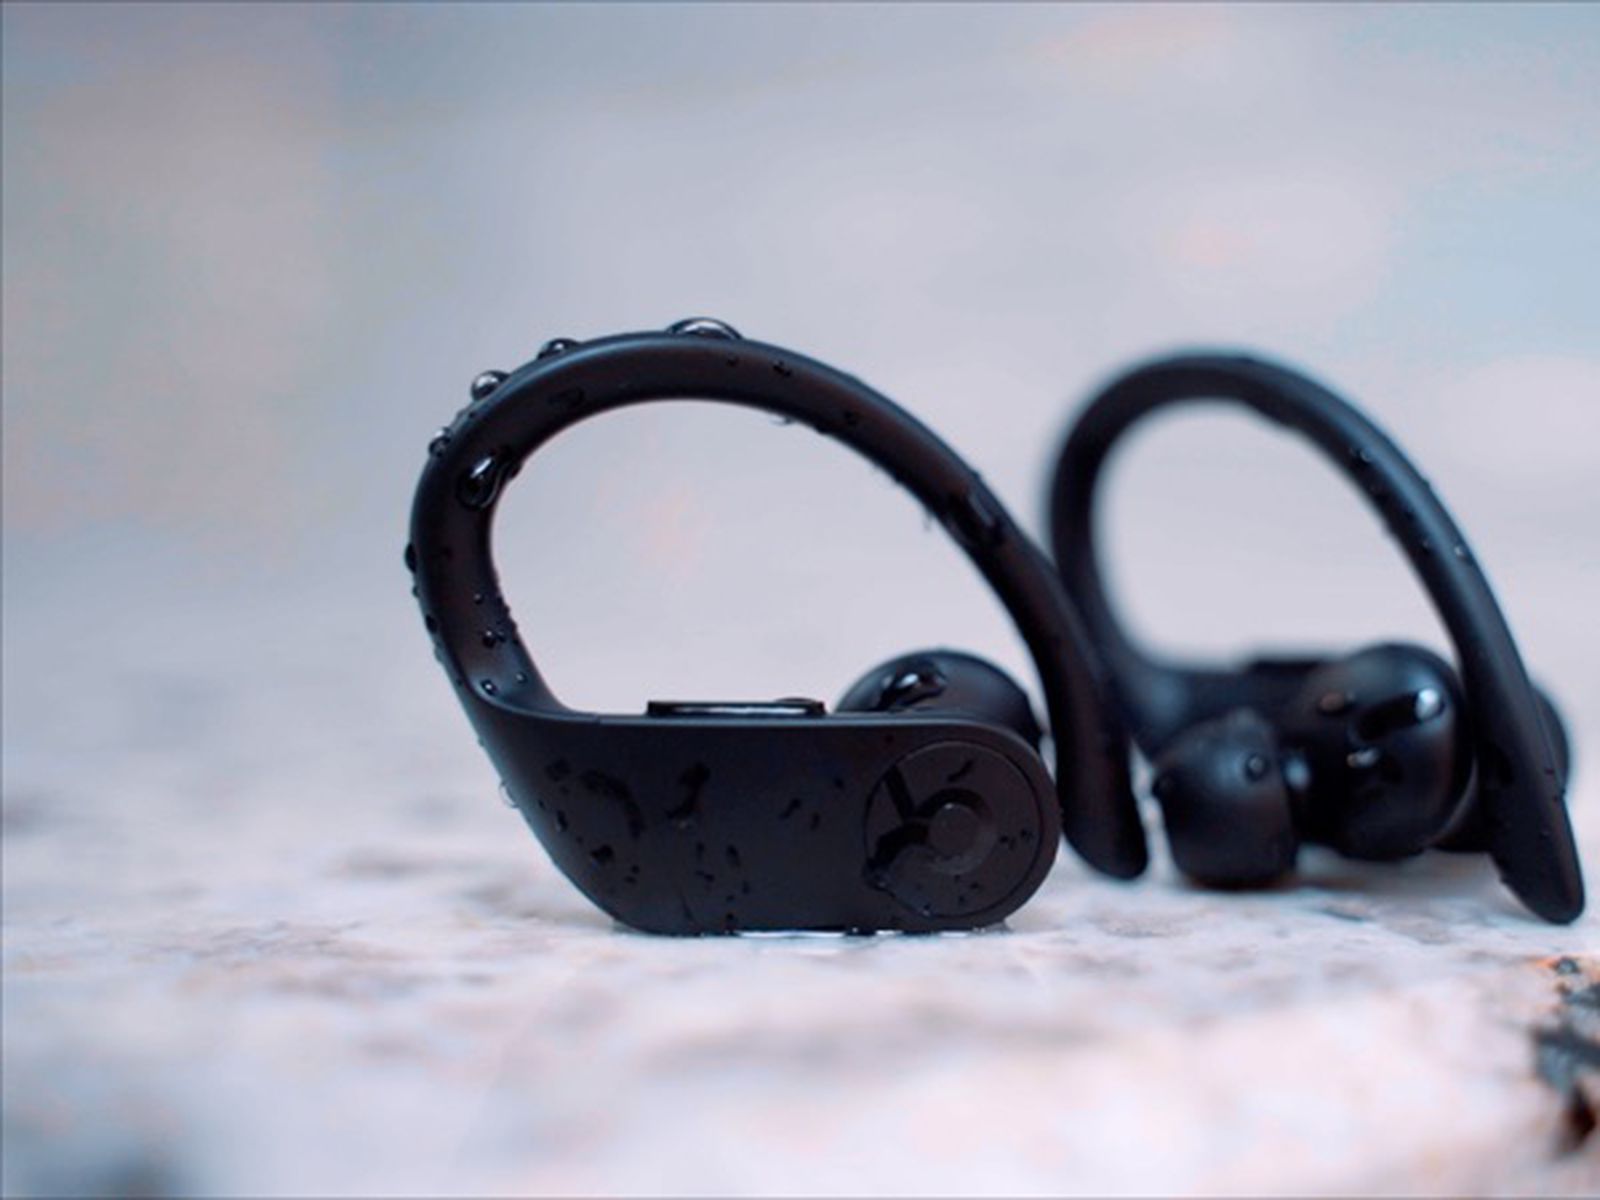 Powerbeats Pro Water Resistance Find Out What Happens if You Drop Apple's Newest Earbuds in the Toilet - MacRumors